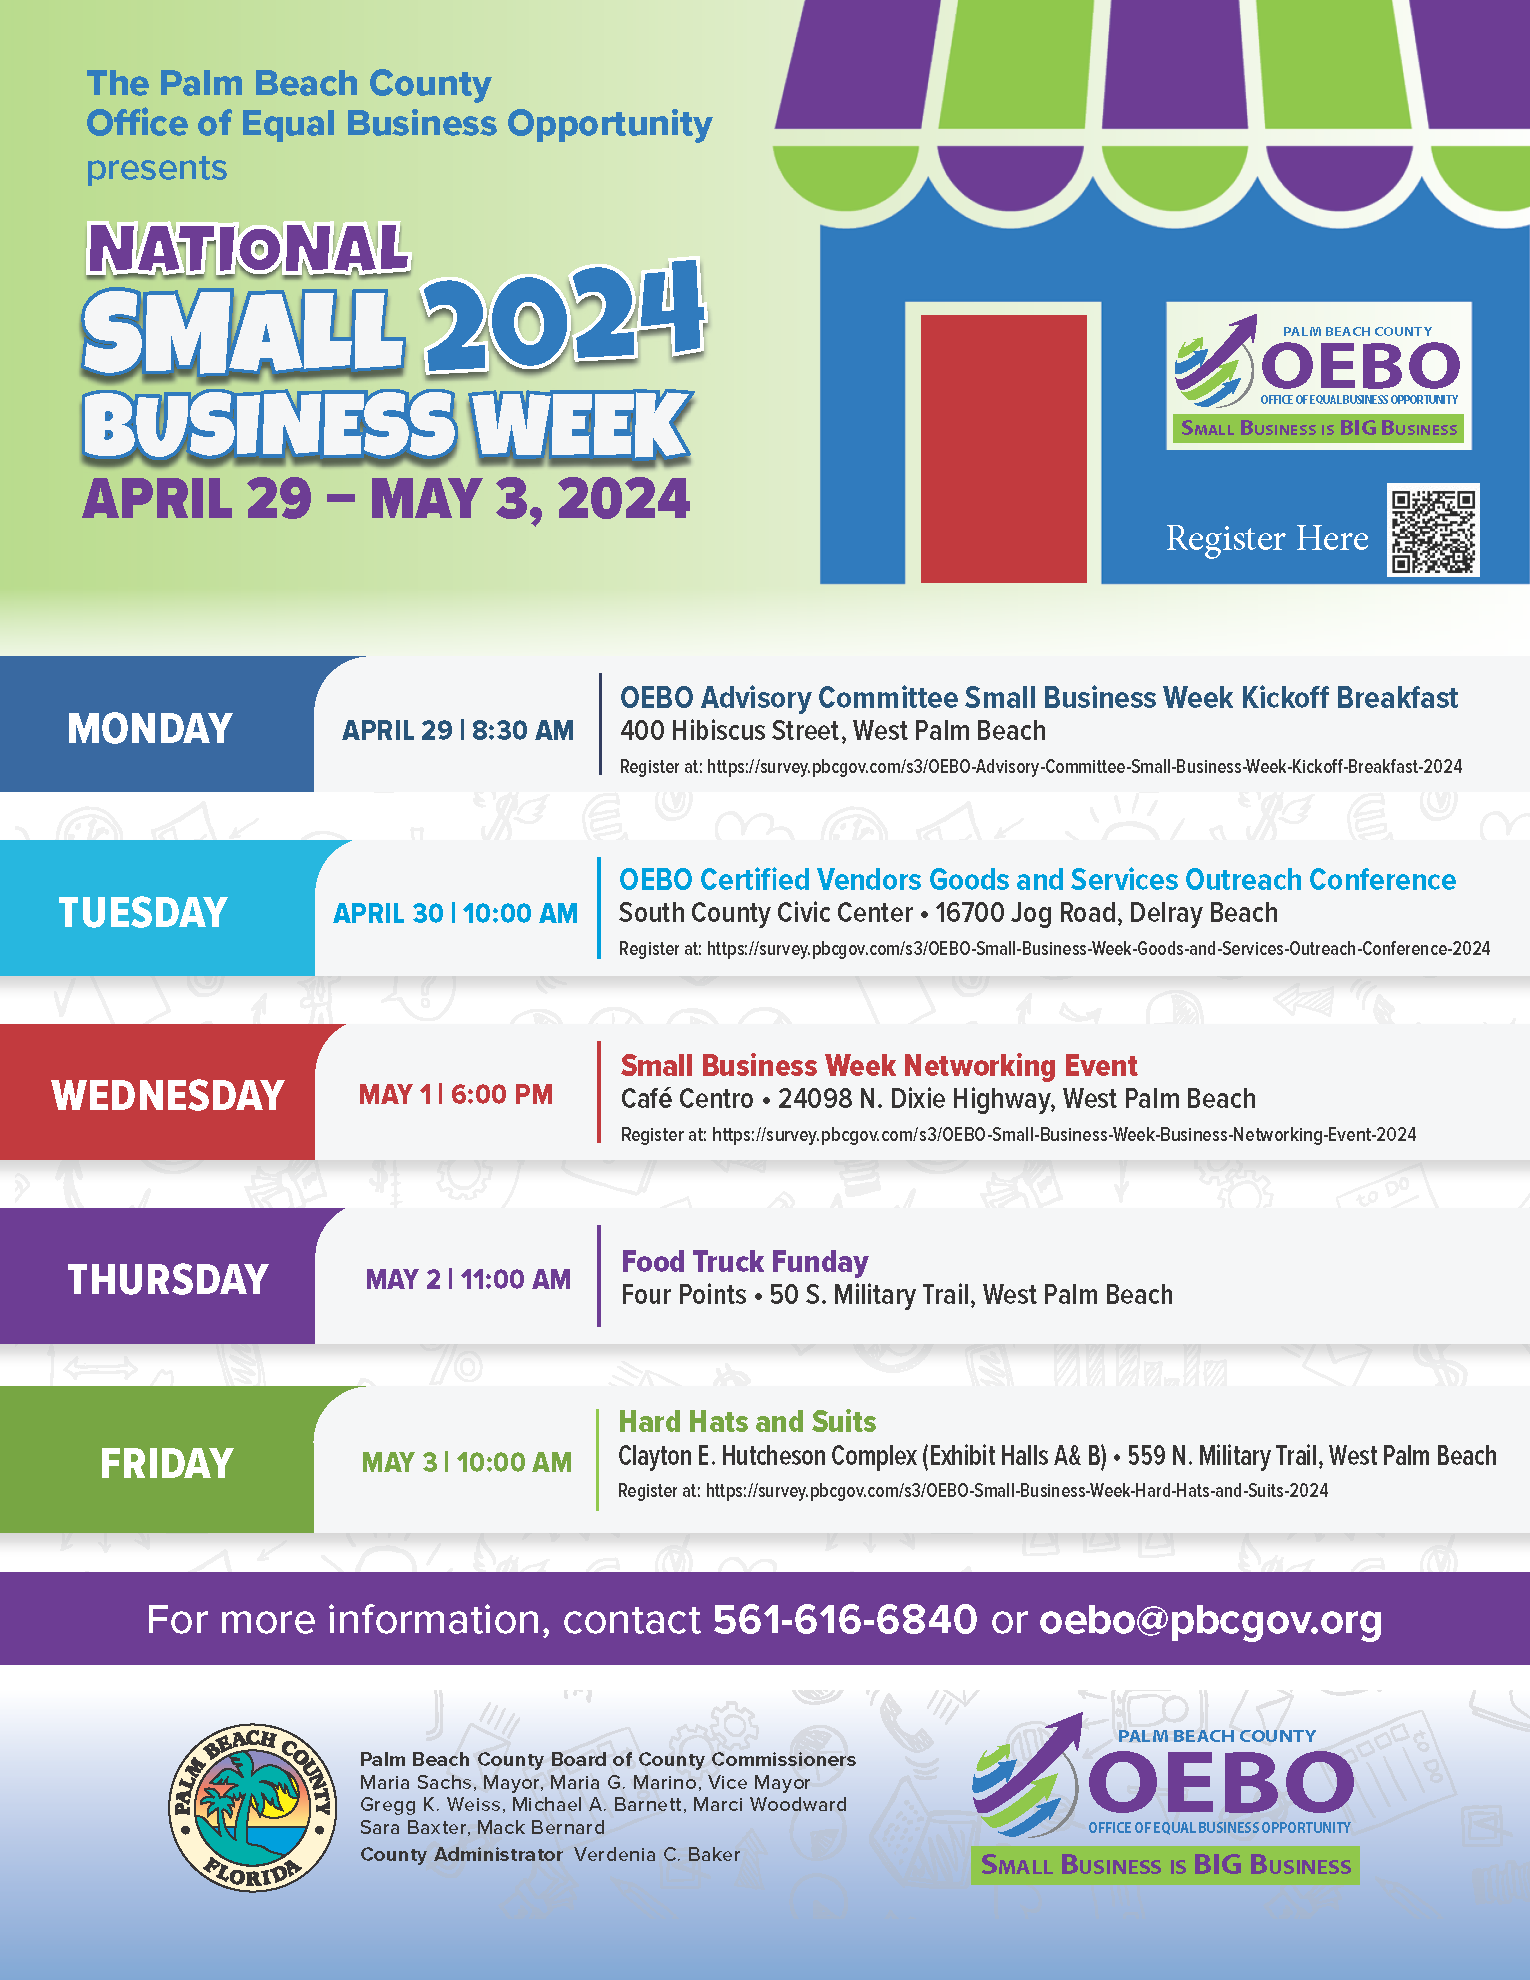 Small Business Week 2024